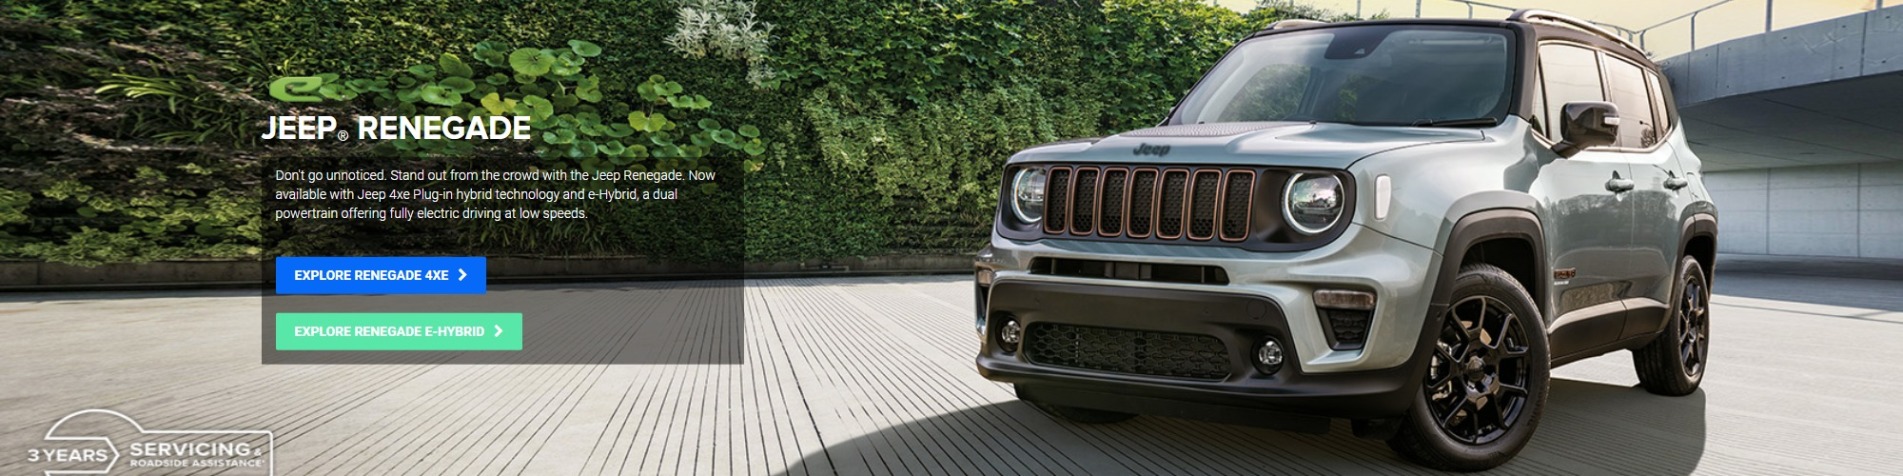 Jeep Renegade banner